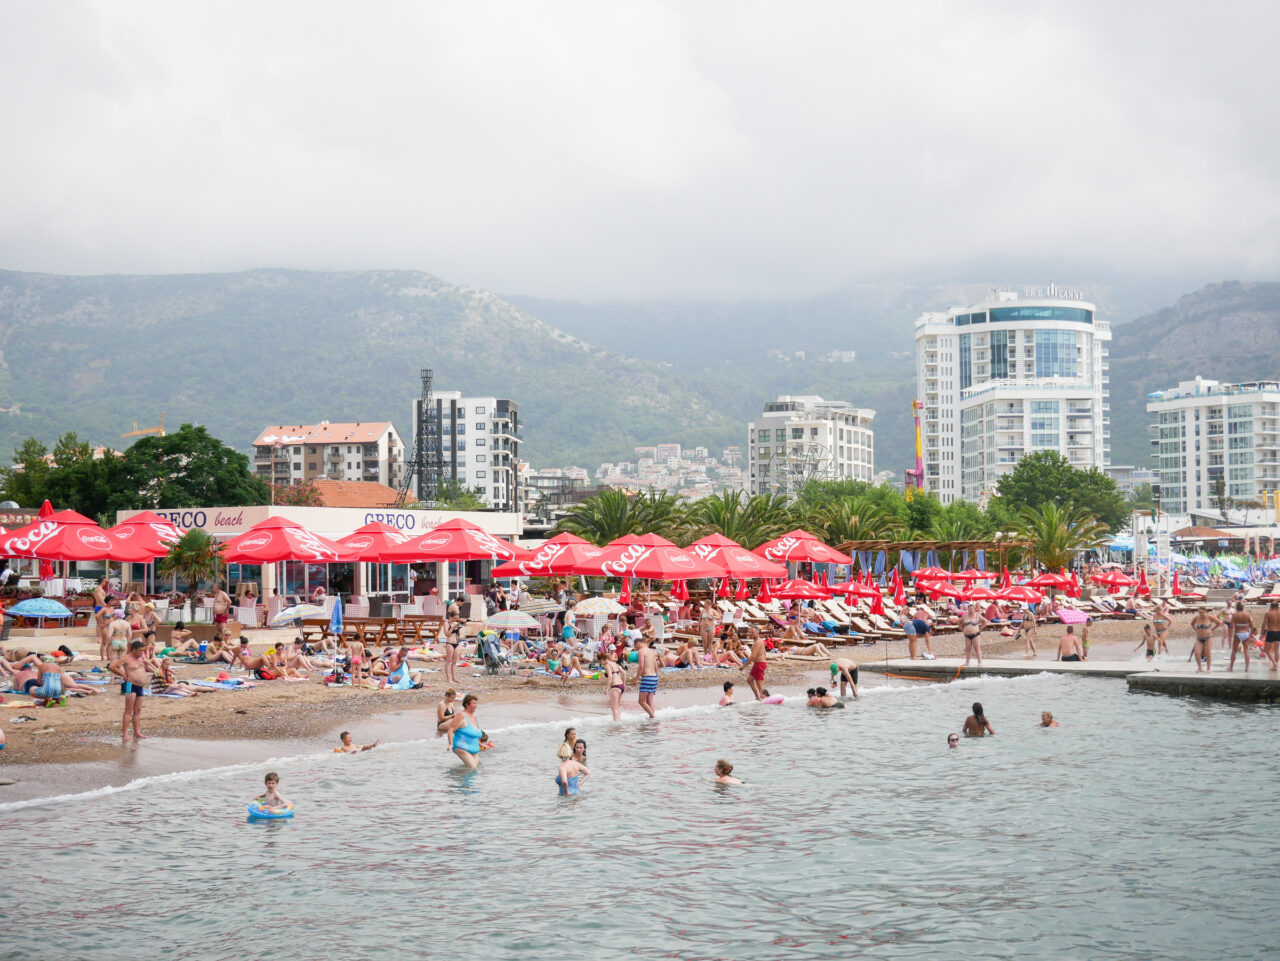 Beach Greco crowded with tourists in Budva, Montenegro